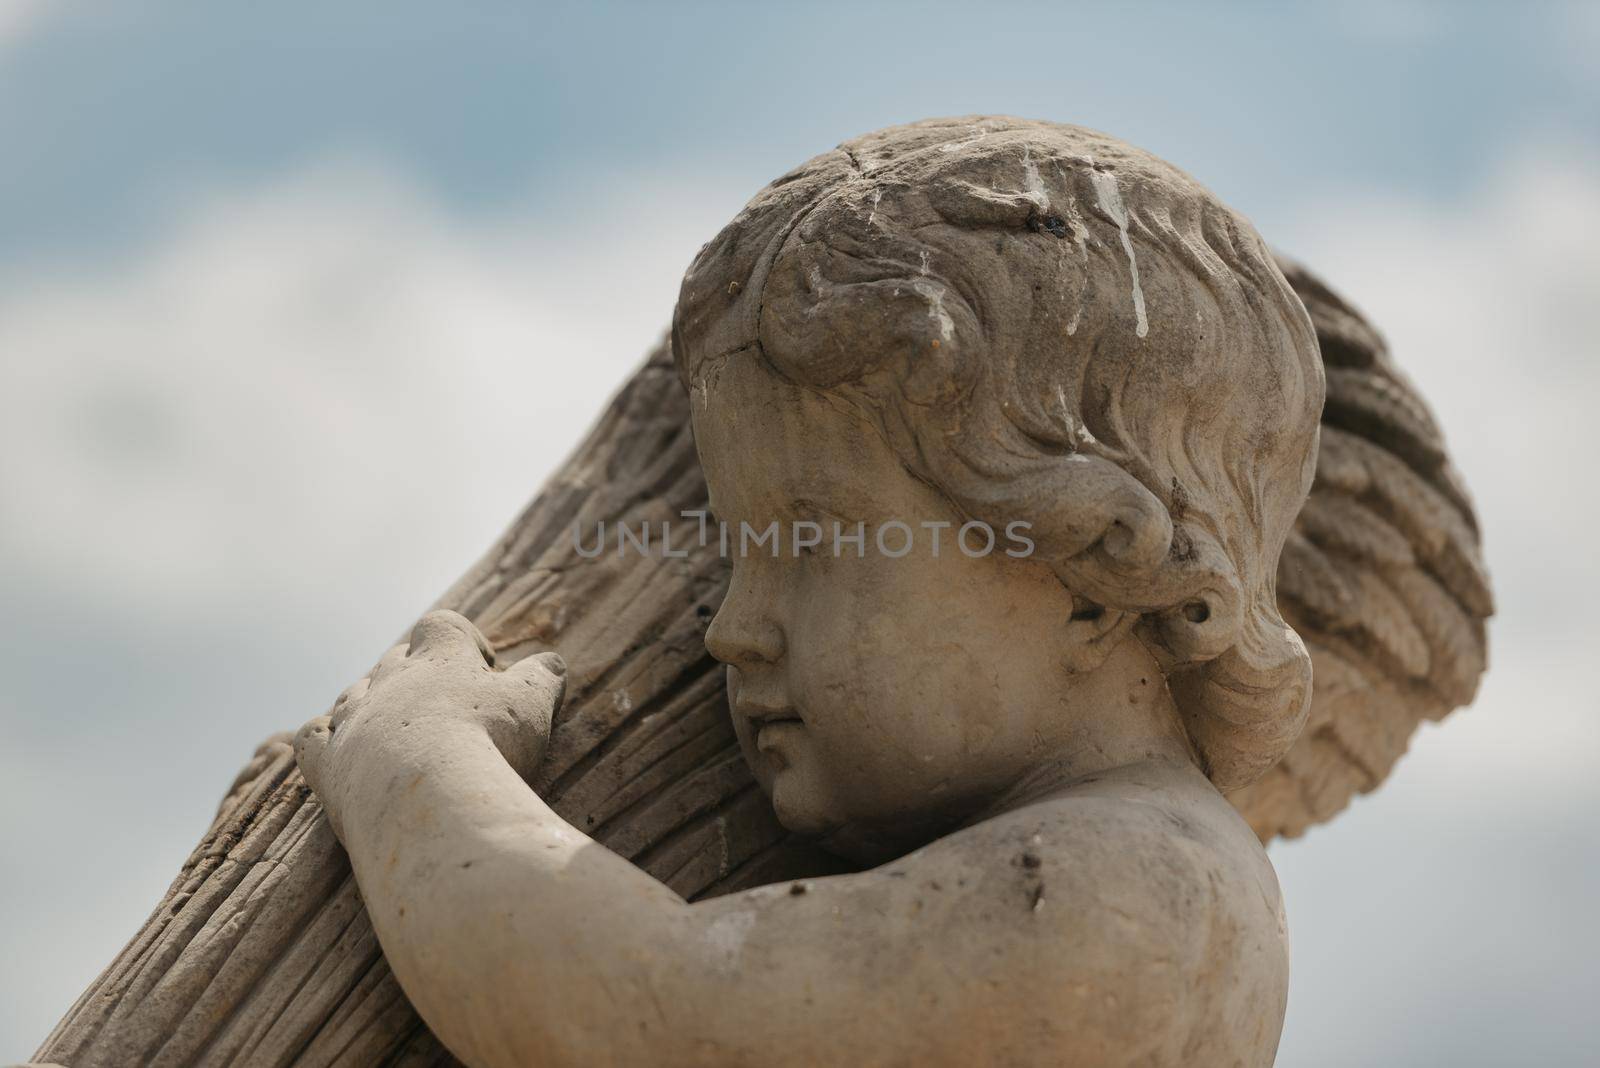 Warsaw, Poland - MAY 12, 2022: The headshot of an old sculpture of the child in Royal Baths Park, Lazienki Park